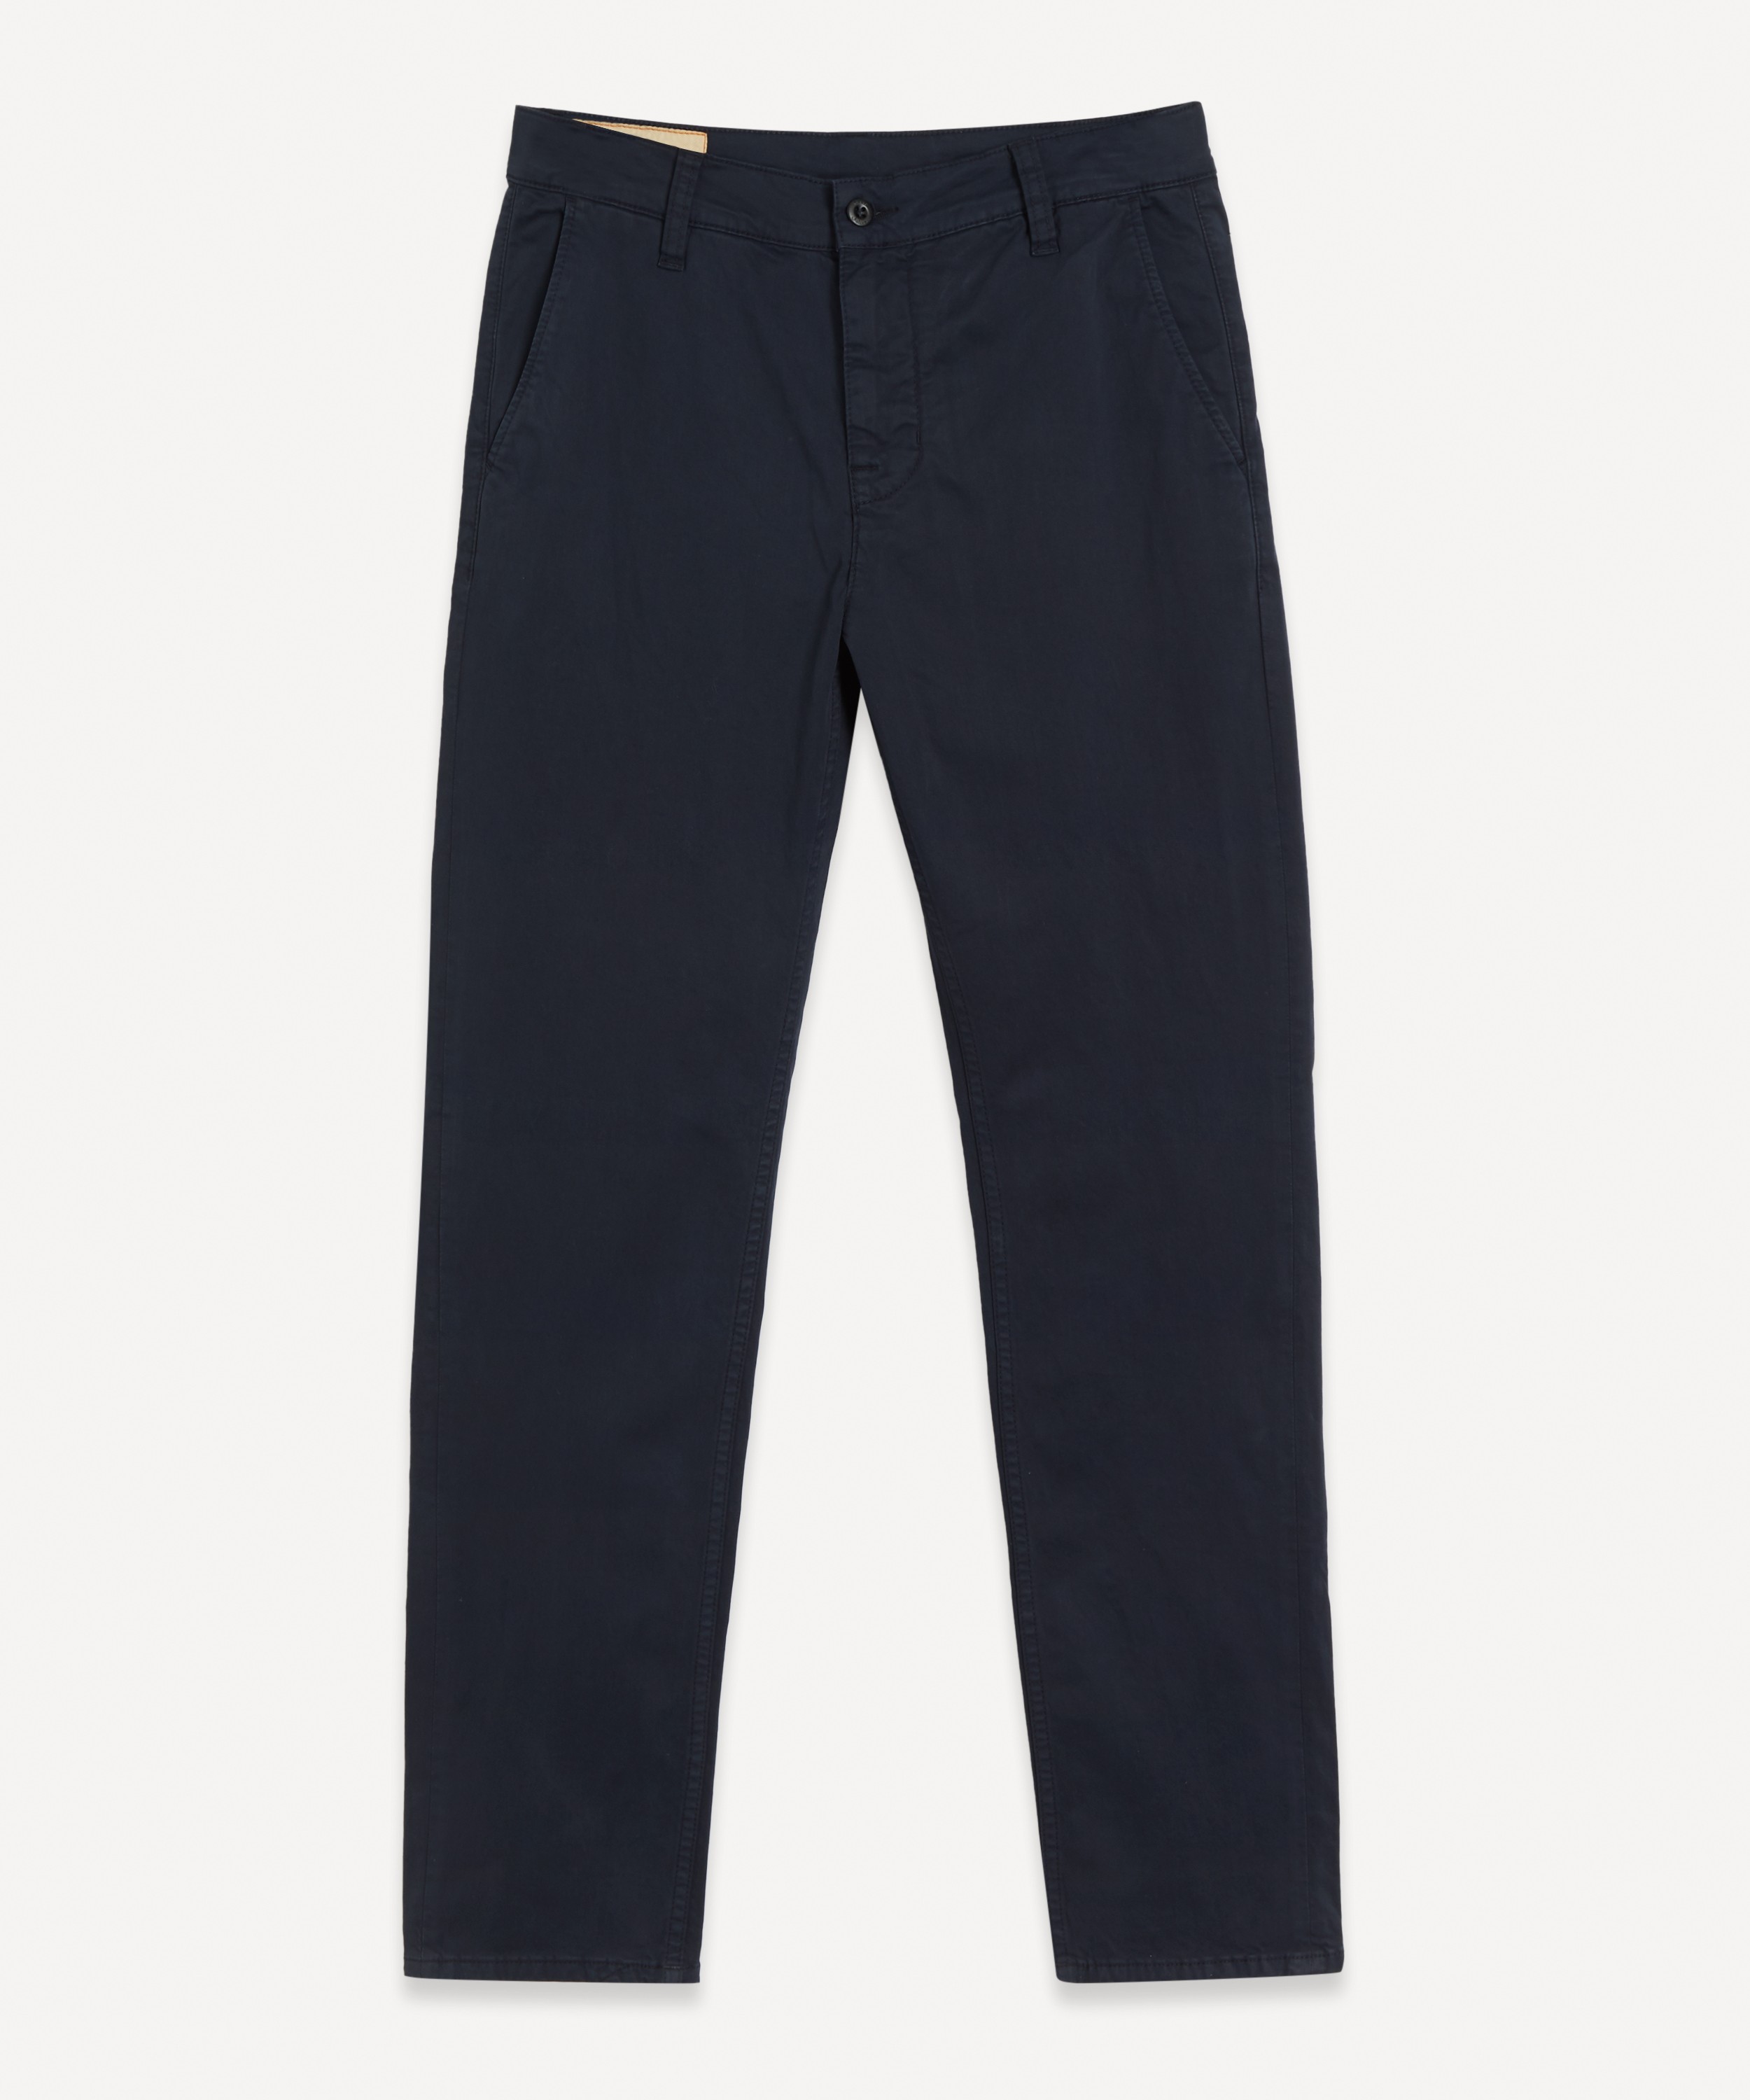 Nudie Jeans - Easy Alvin Chino Trousers